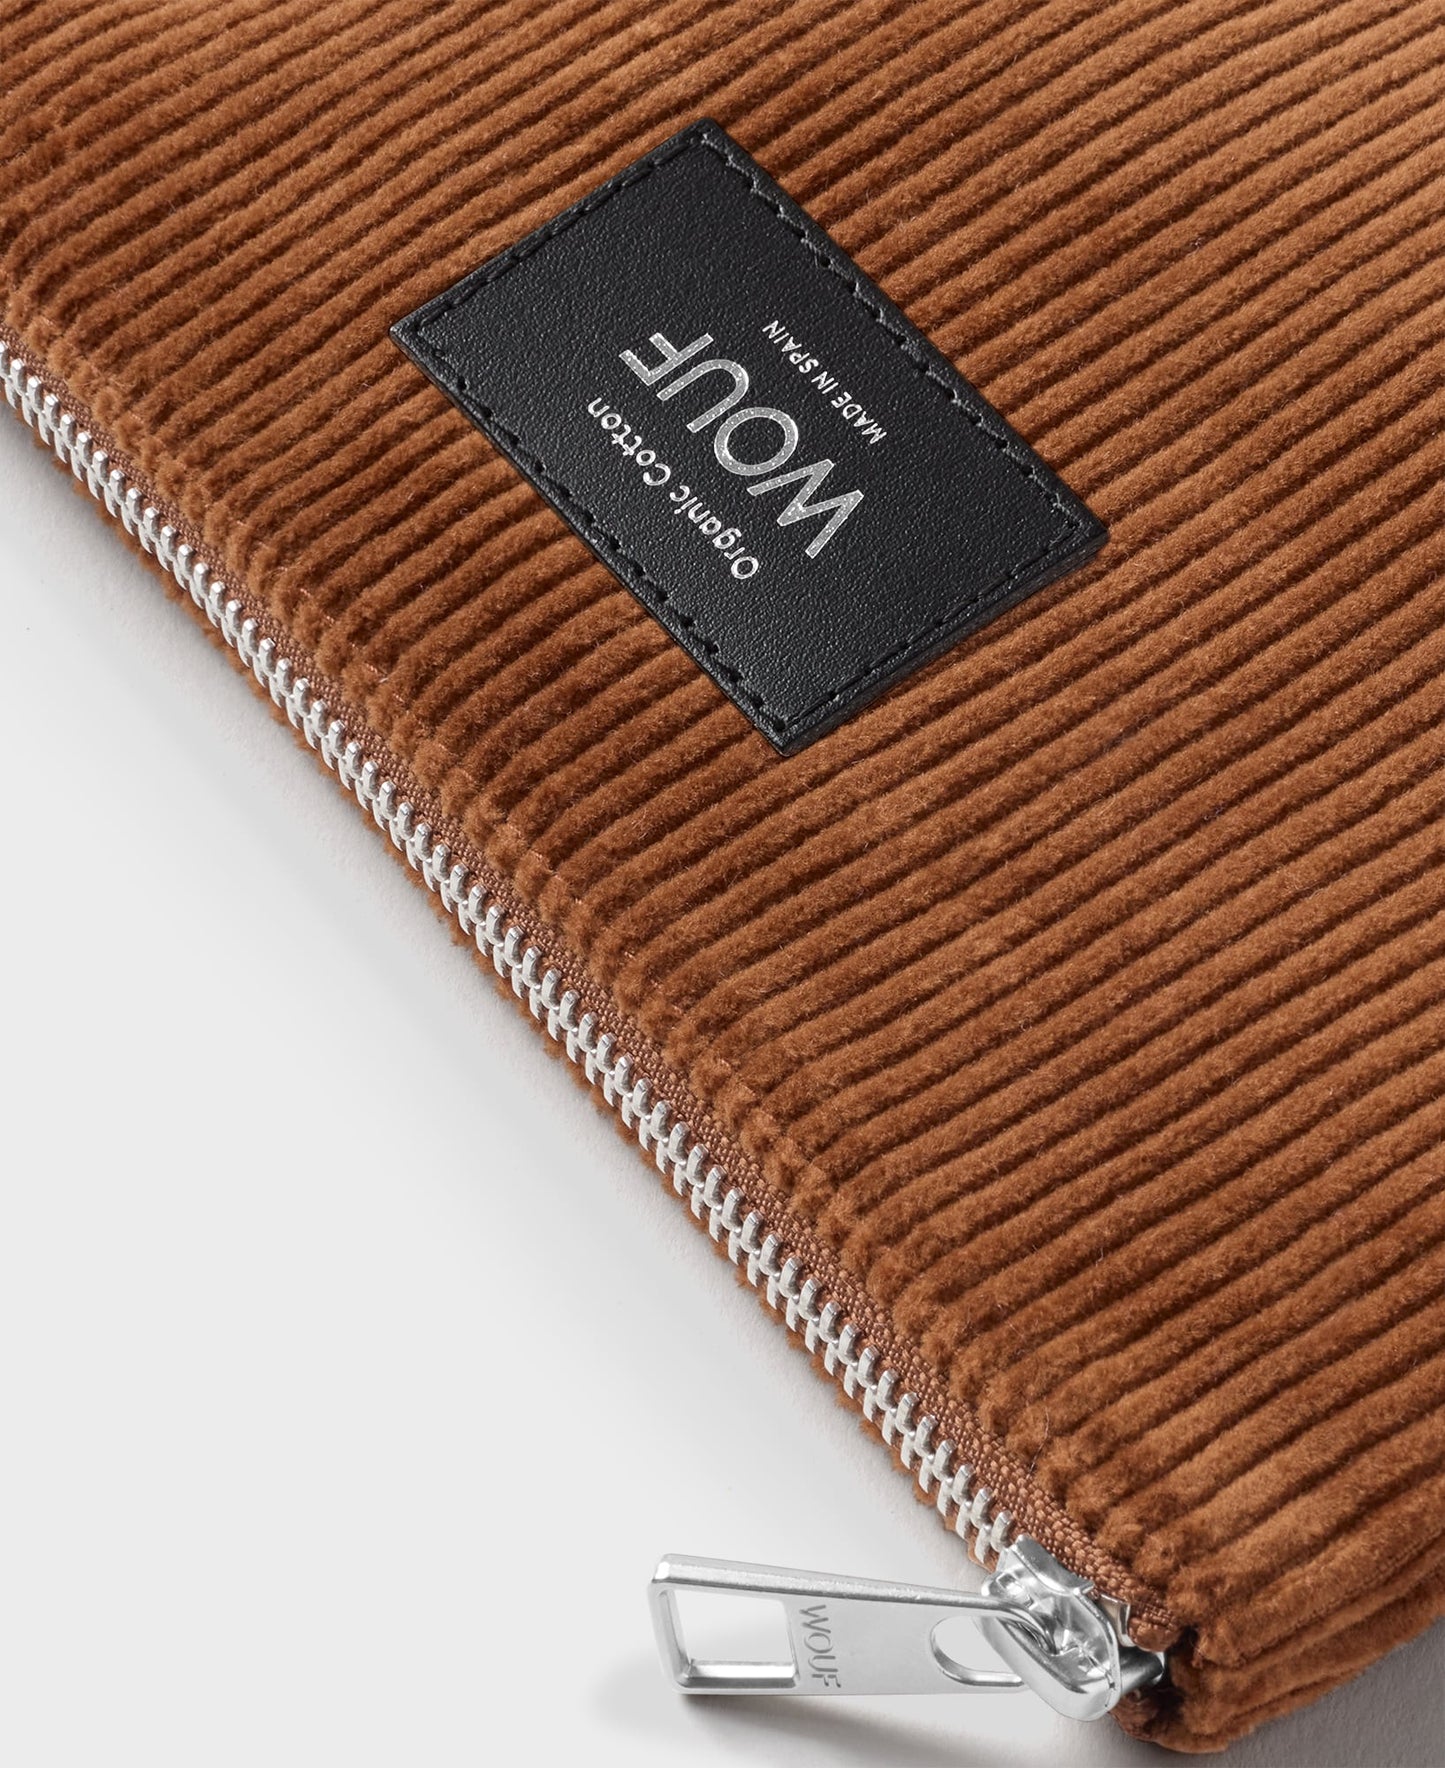 Pouch - Caramel | WOUF